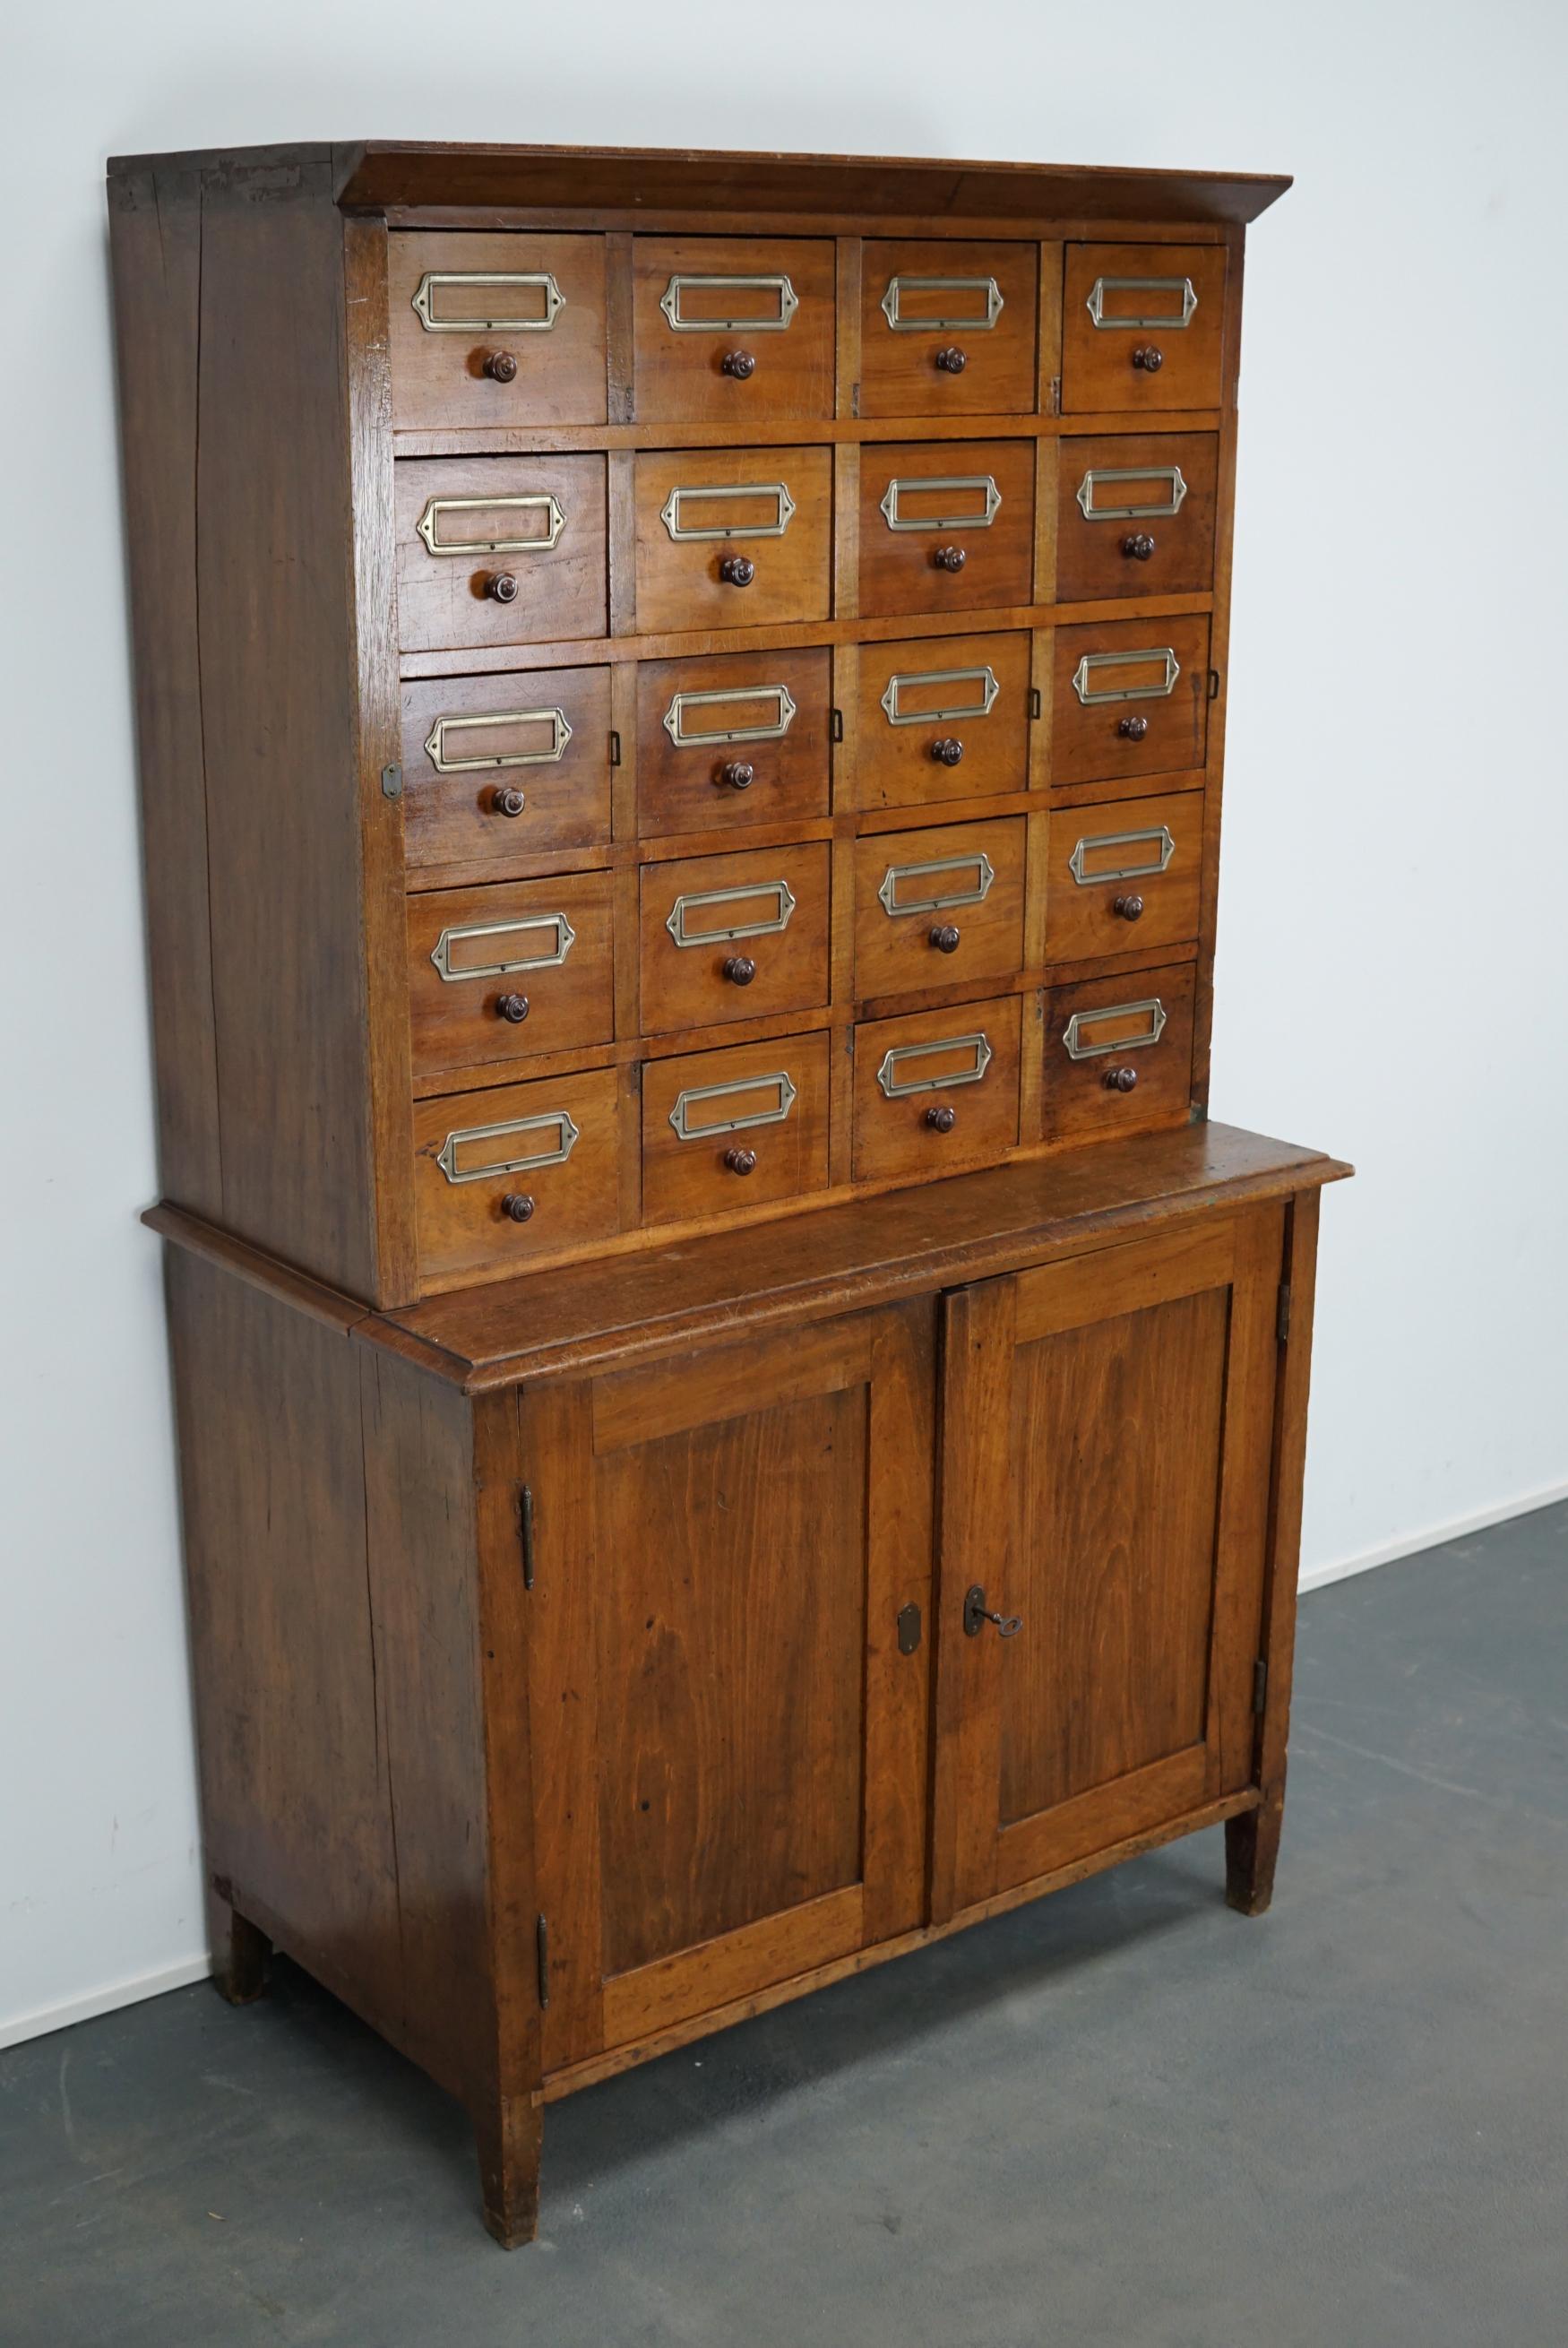 This apothecary cabinet was produced during the 1930s in Germany. This piece features 20 drawers with nice cardholders and wooden pulls. The interior dimensions of the drawers are: D x W x H 30 x 16.5 x 6.5 / 12 cm for the top drawers. The cabinet